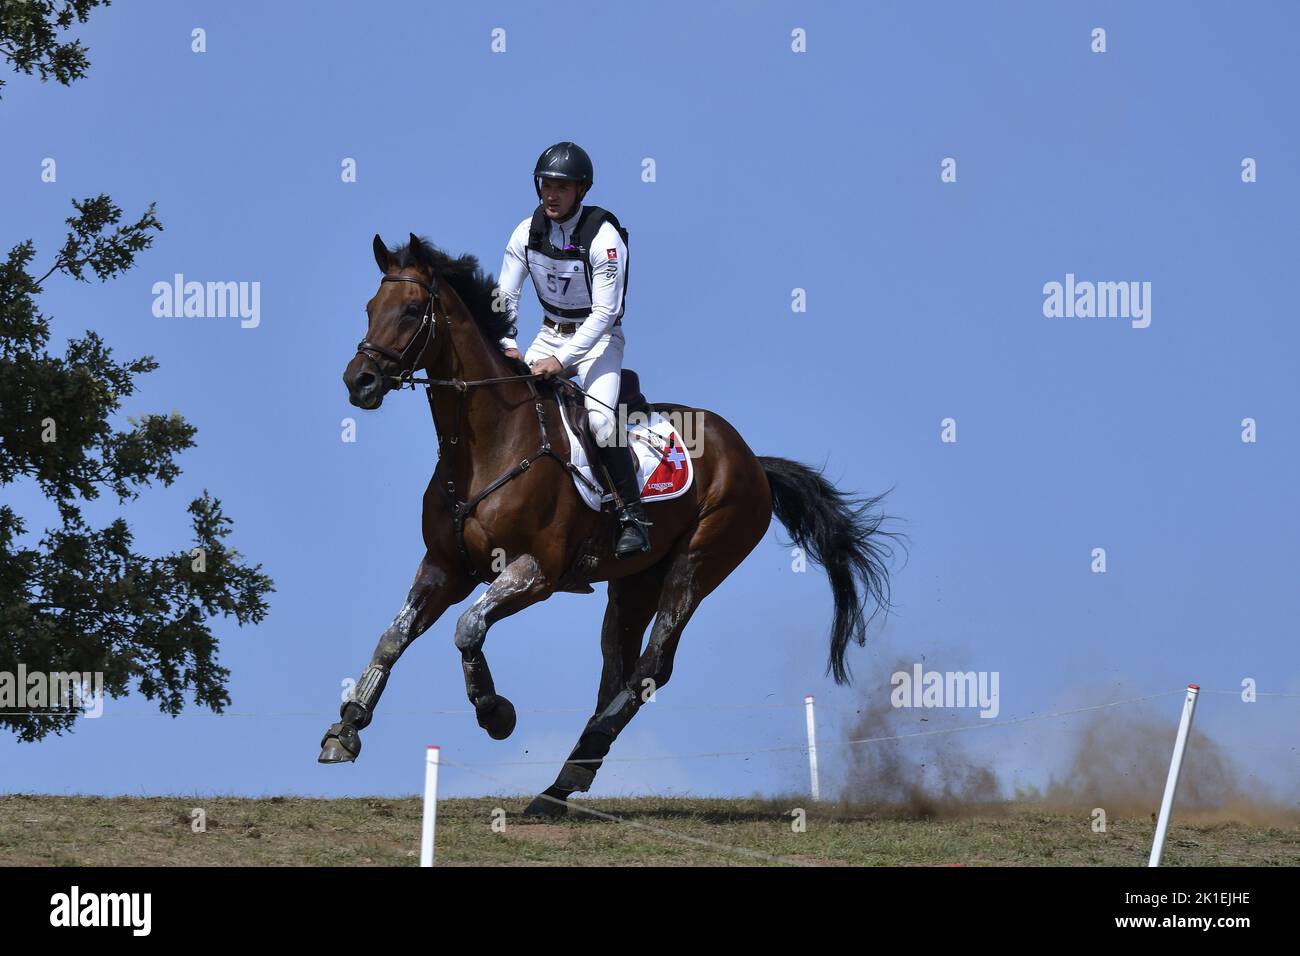 Robin Godel (SUI) riding Grandeur de Lully CH during the cross-country course of the Equestrian FEI Eventing World Championships on September 17, 2022 at Pratoni del Vivaro, Rome, Italy Stock Photo